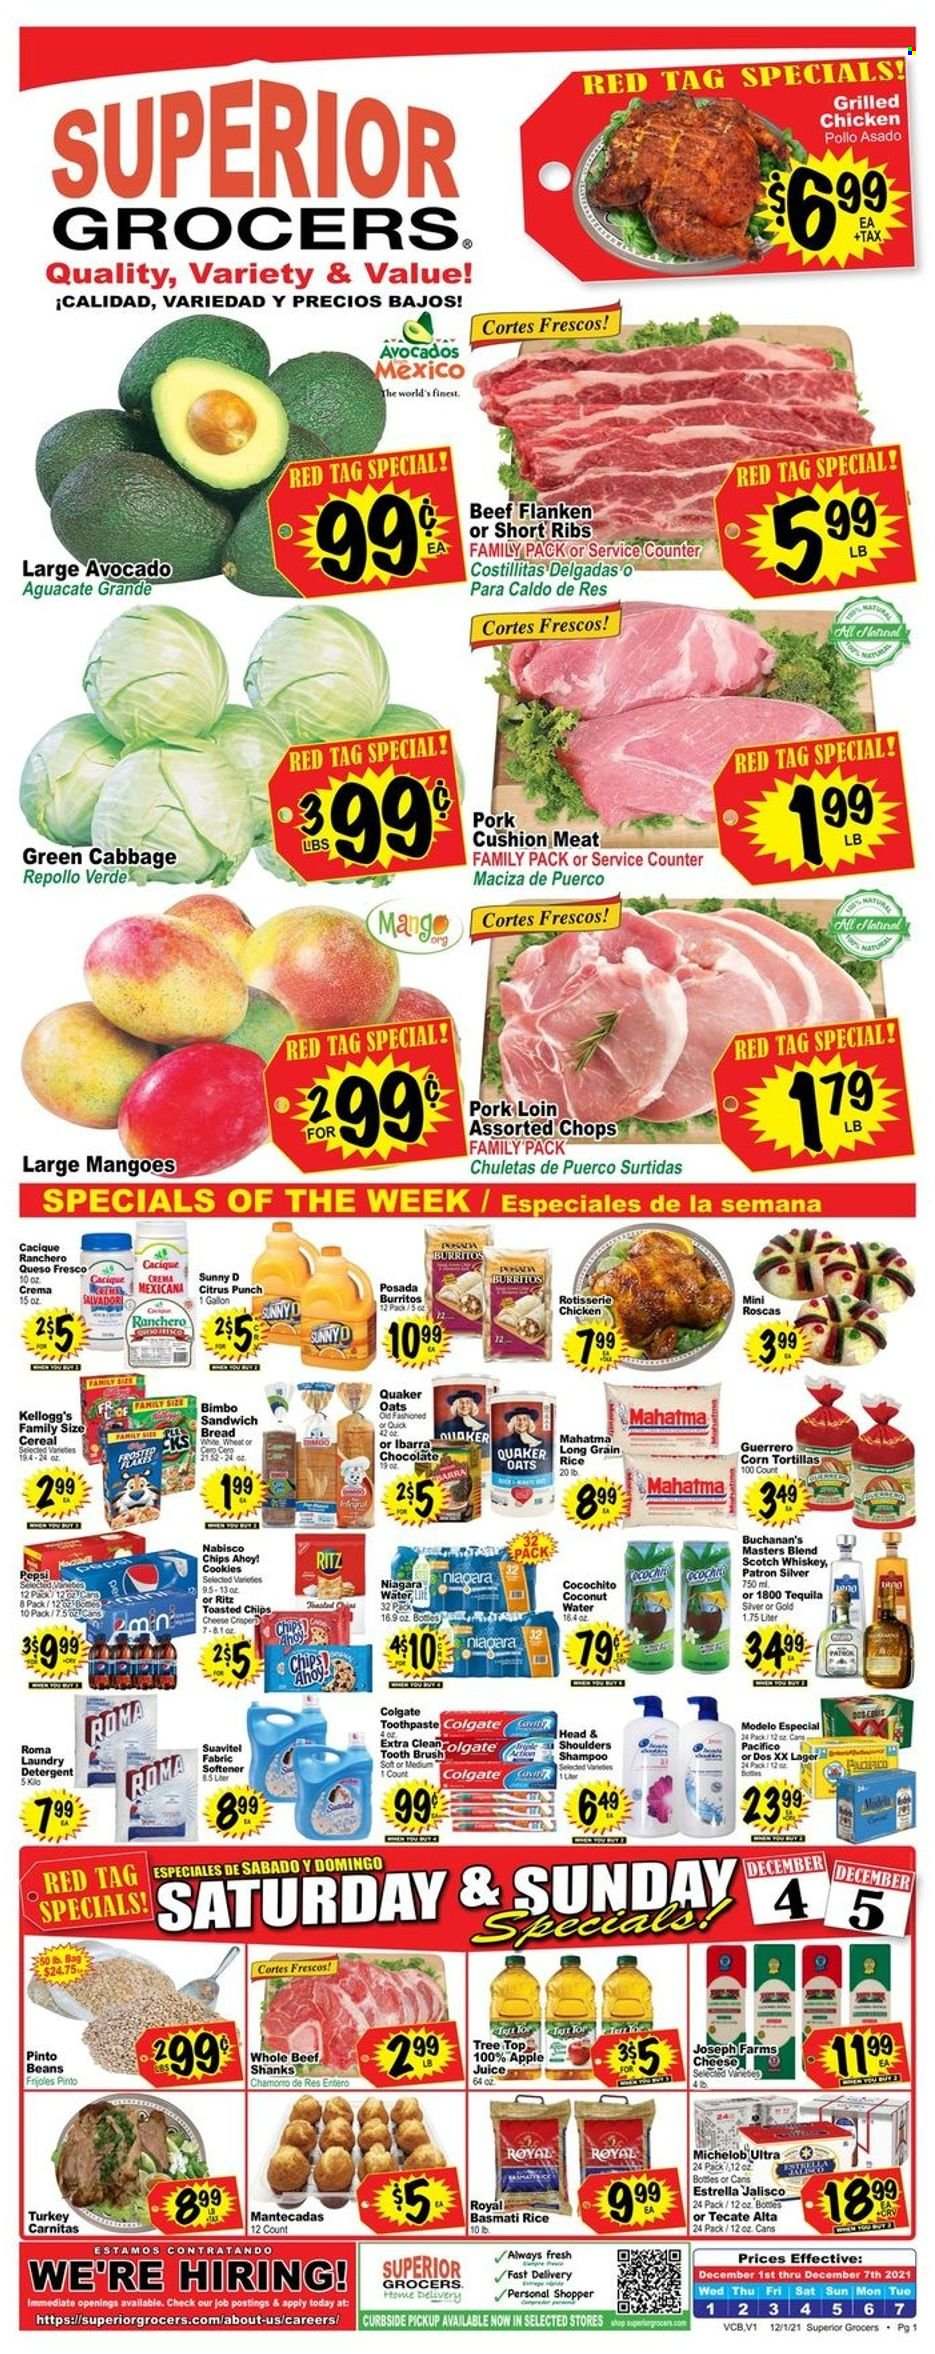 thumbnail - Superior Grocers Flyer - 12/01/2021 - 12/07/2021 - Sales products - bread, corn tortillas, tortillas, beans, cabbage, avocado, mango, pork loin, pork meat, chicken roast, burrito, Quaker, queso fresco, cheese, cookies, chocolate, Kellogg's, Chips Ahoy!, RITZ, chips, oats, pinto beans, cereals, basmati rice, rice, long grain rice, apple juice, Pepsi, juice, coconut water, fruit punch, tequila, whiskey, whisky, beer, Lager, Modelo, fabric softener, laundry detergent, Colgate, toothbrush, toothpaste, Michelob. Page 1.